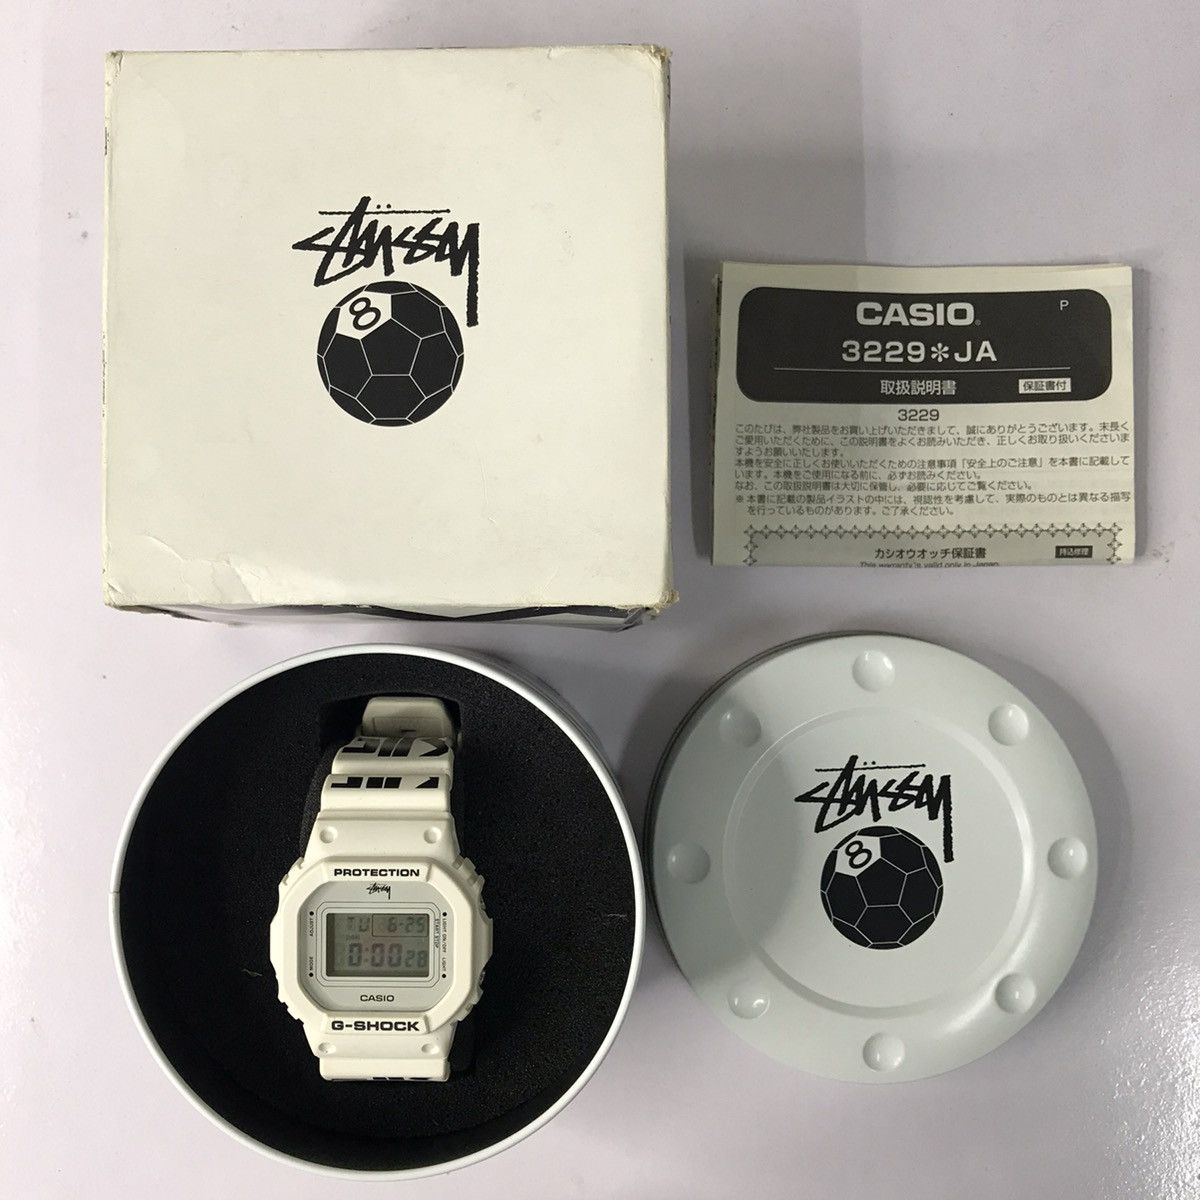 Stussy Limited Edition Gshock x Stussy 'Football' Watches | Grailed